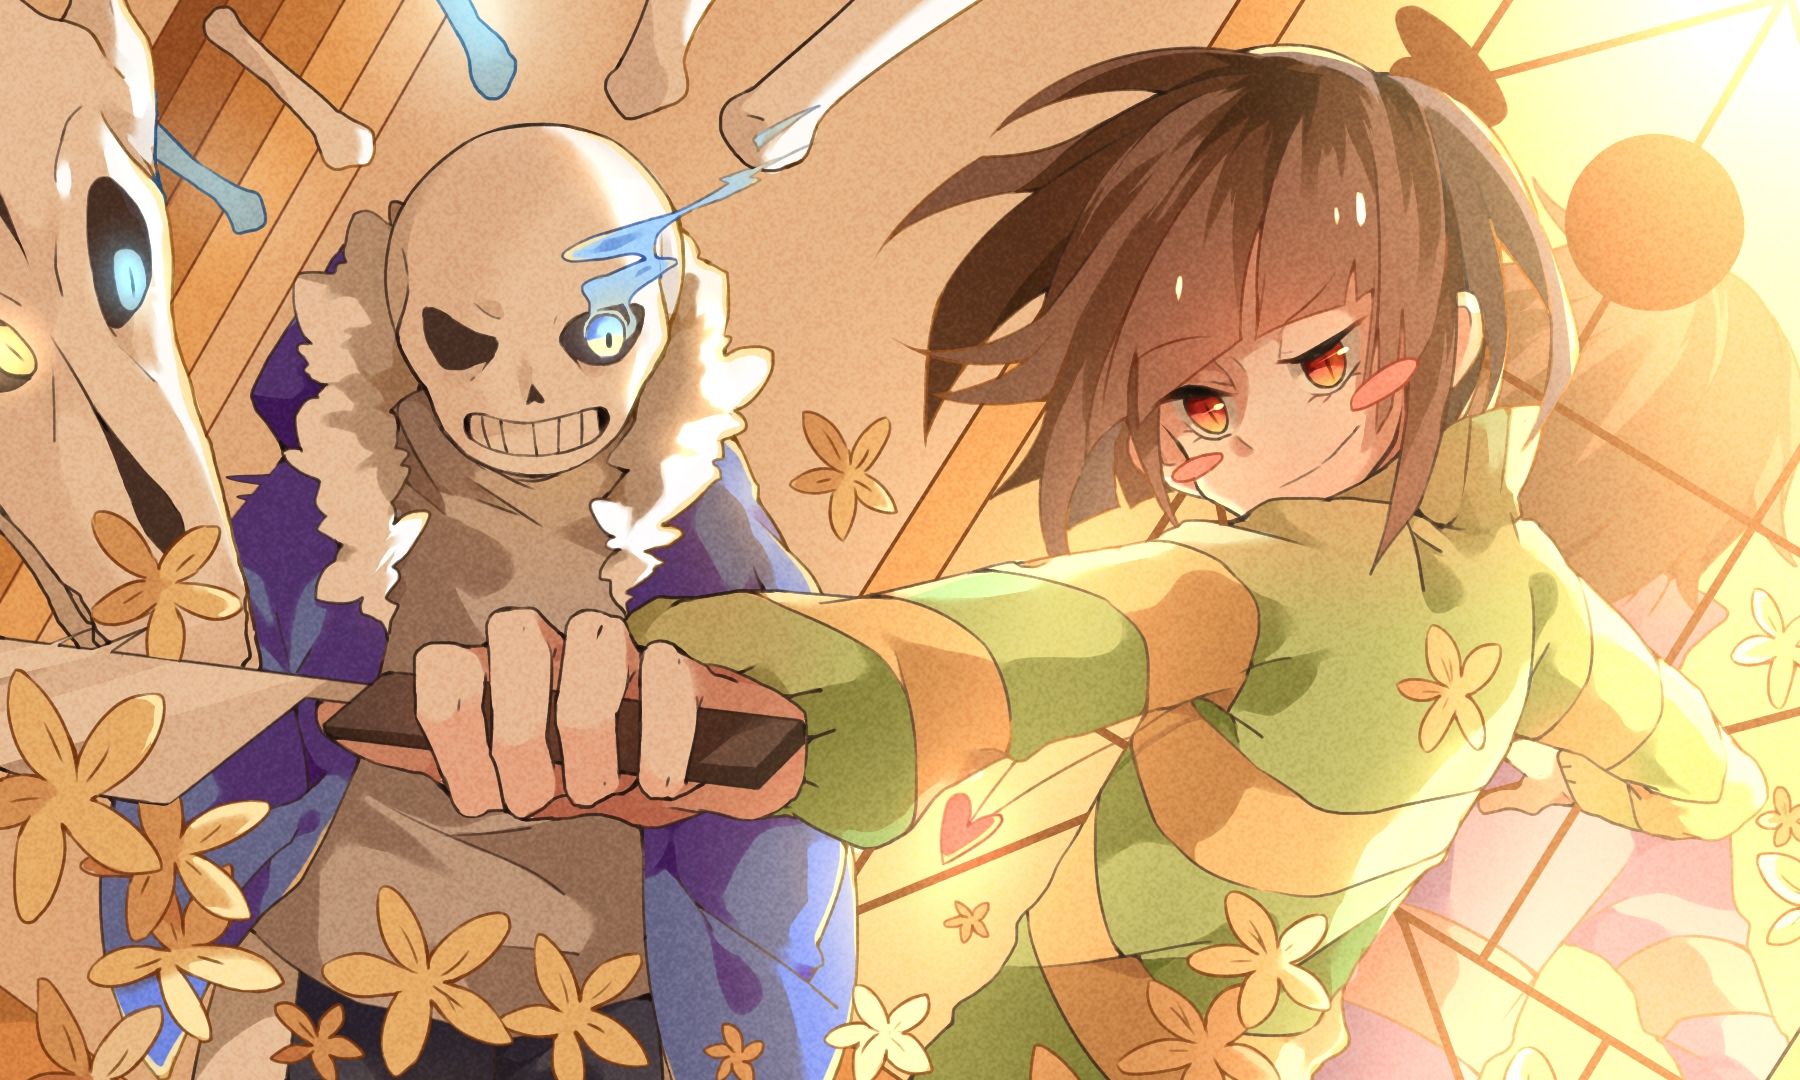 60 Chara Undertale HD Wallpapers and Backgrounds